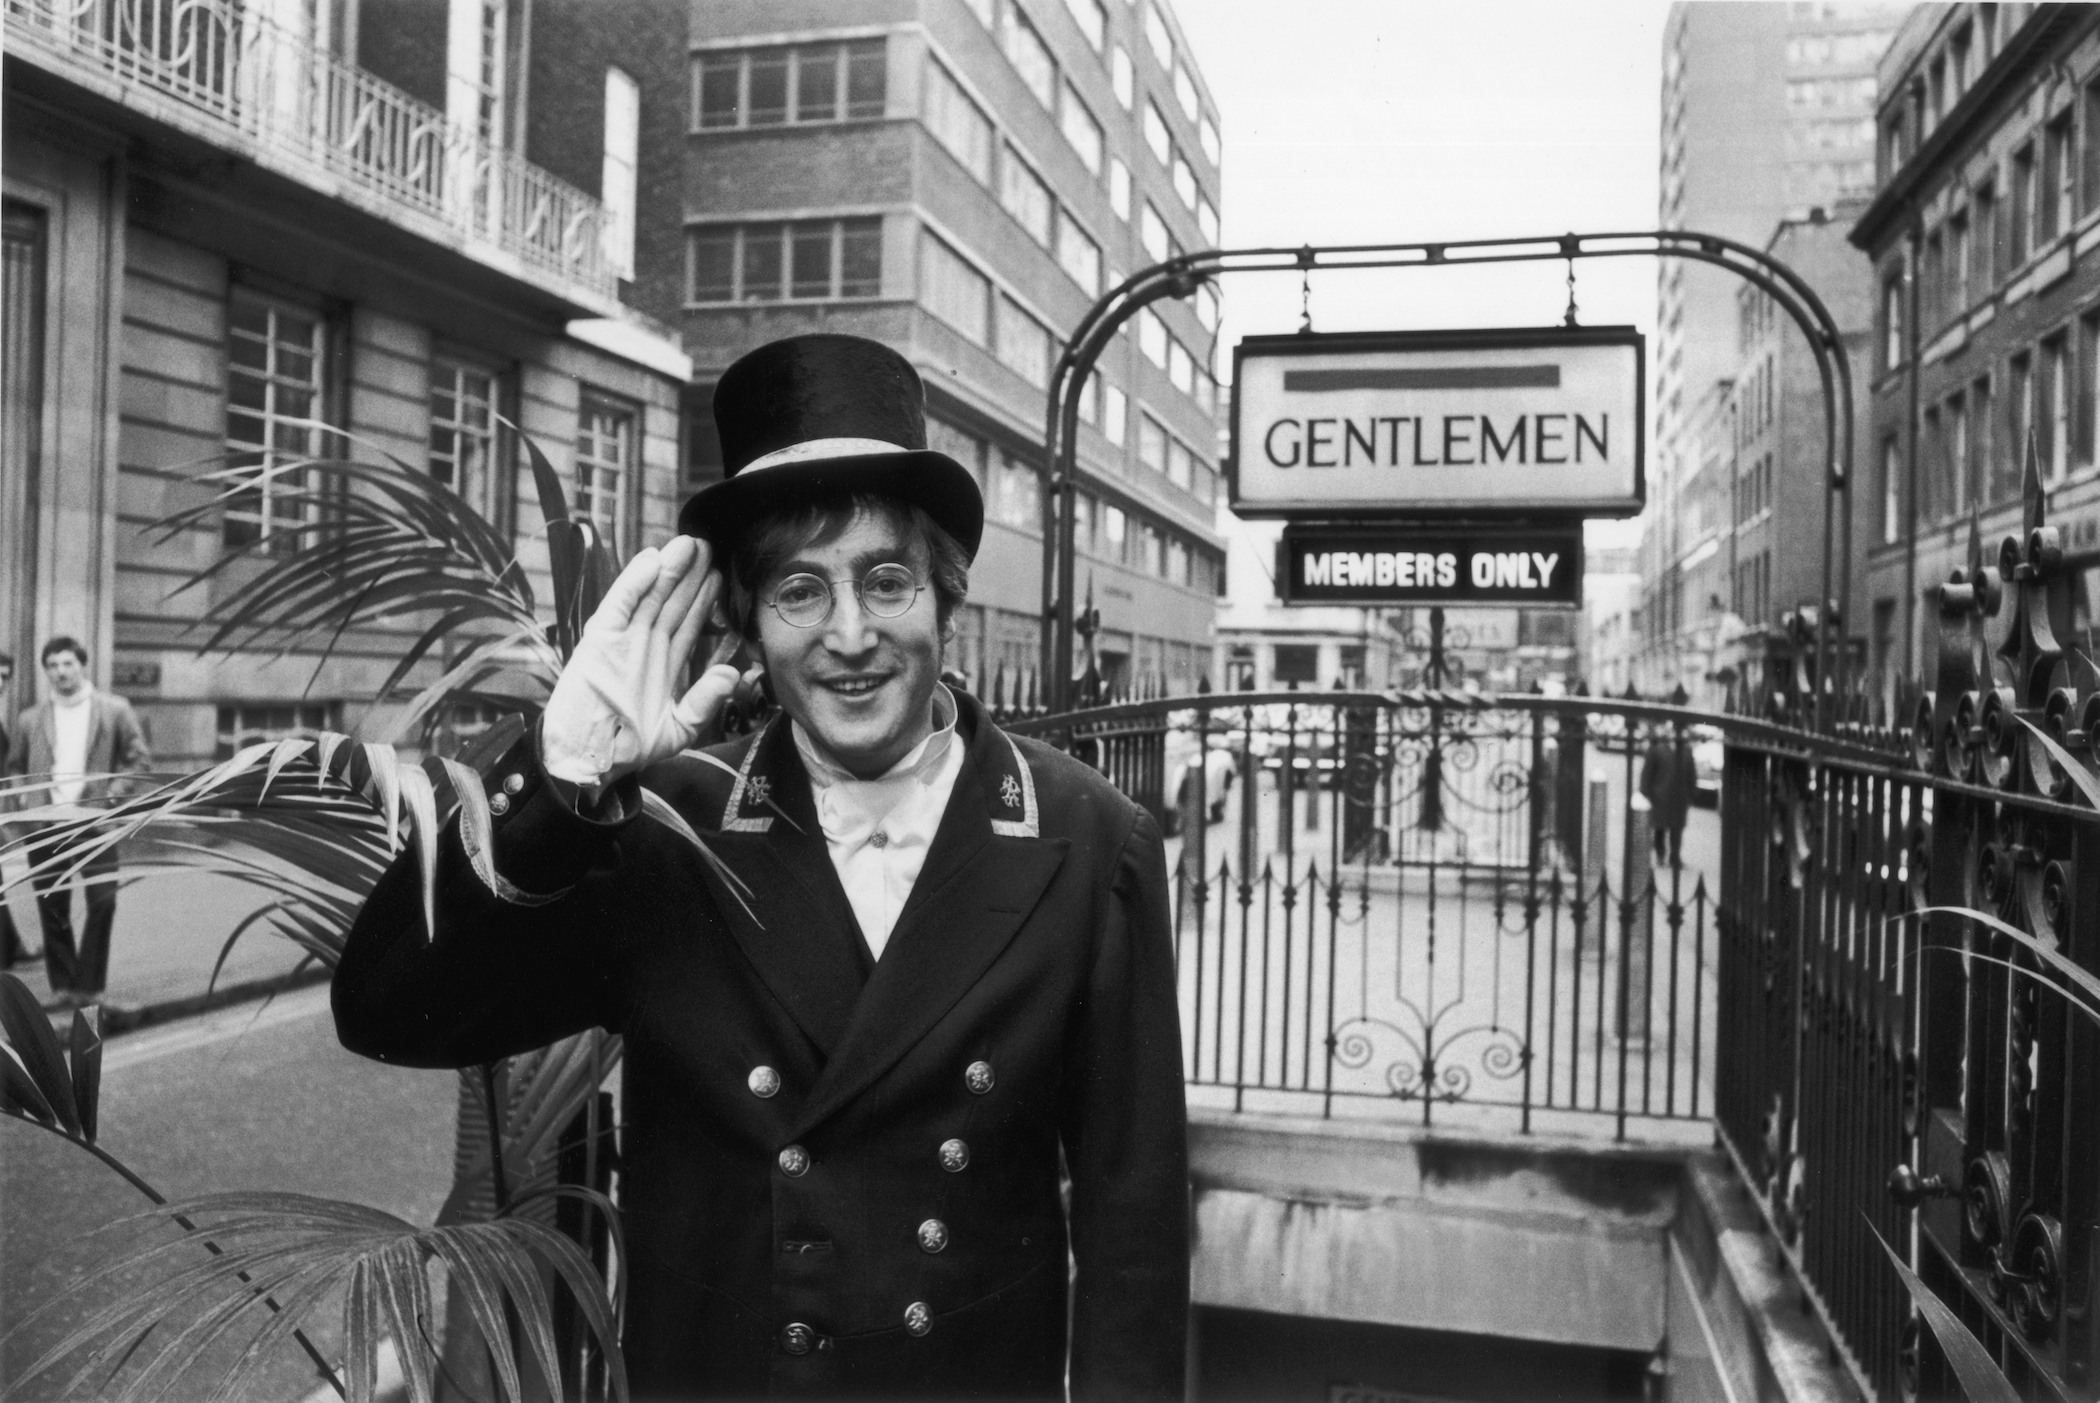 British rock musician and member of The Beatles, John Lennon (1940 - 1980), dressed as a Public Lavatory Commissionaire